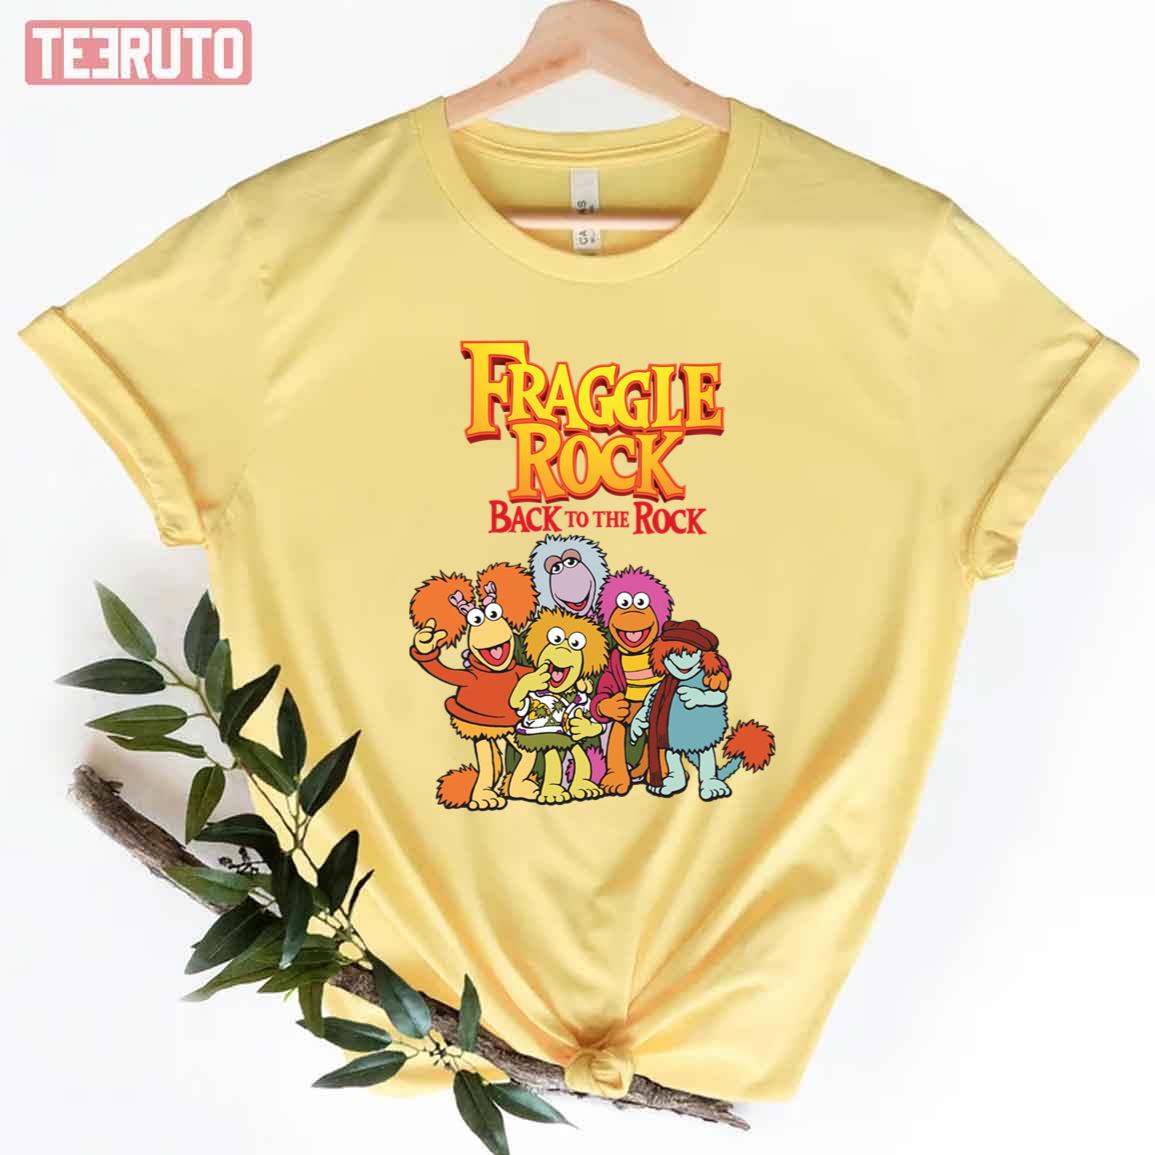 Back To The Rock Fraggle Rock Show Unisex T Shirt